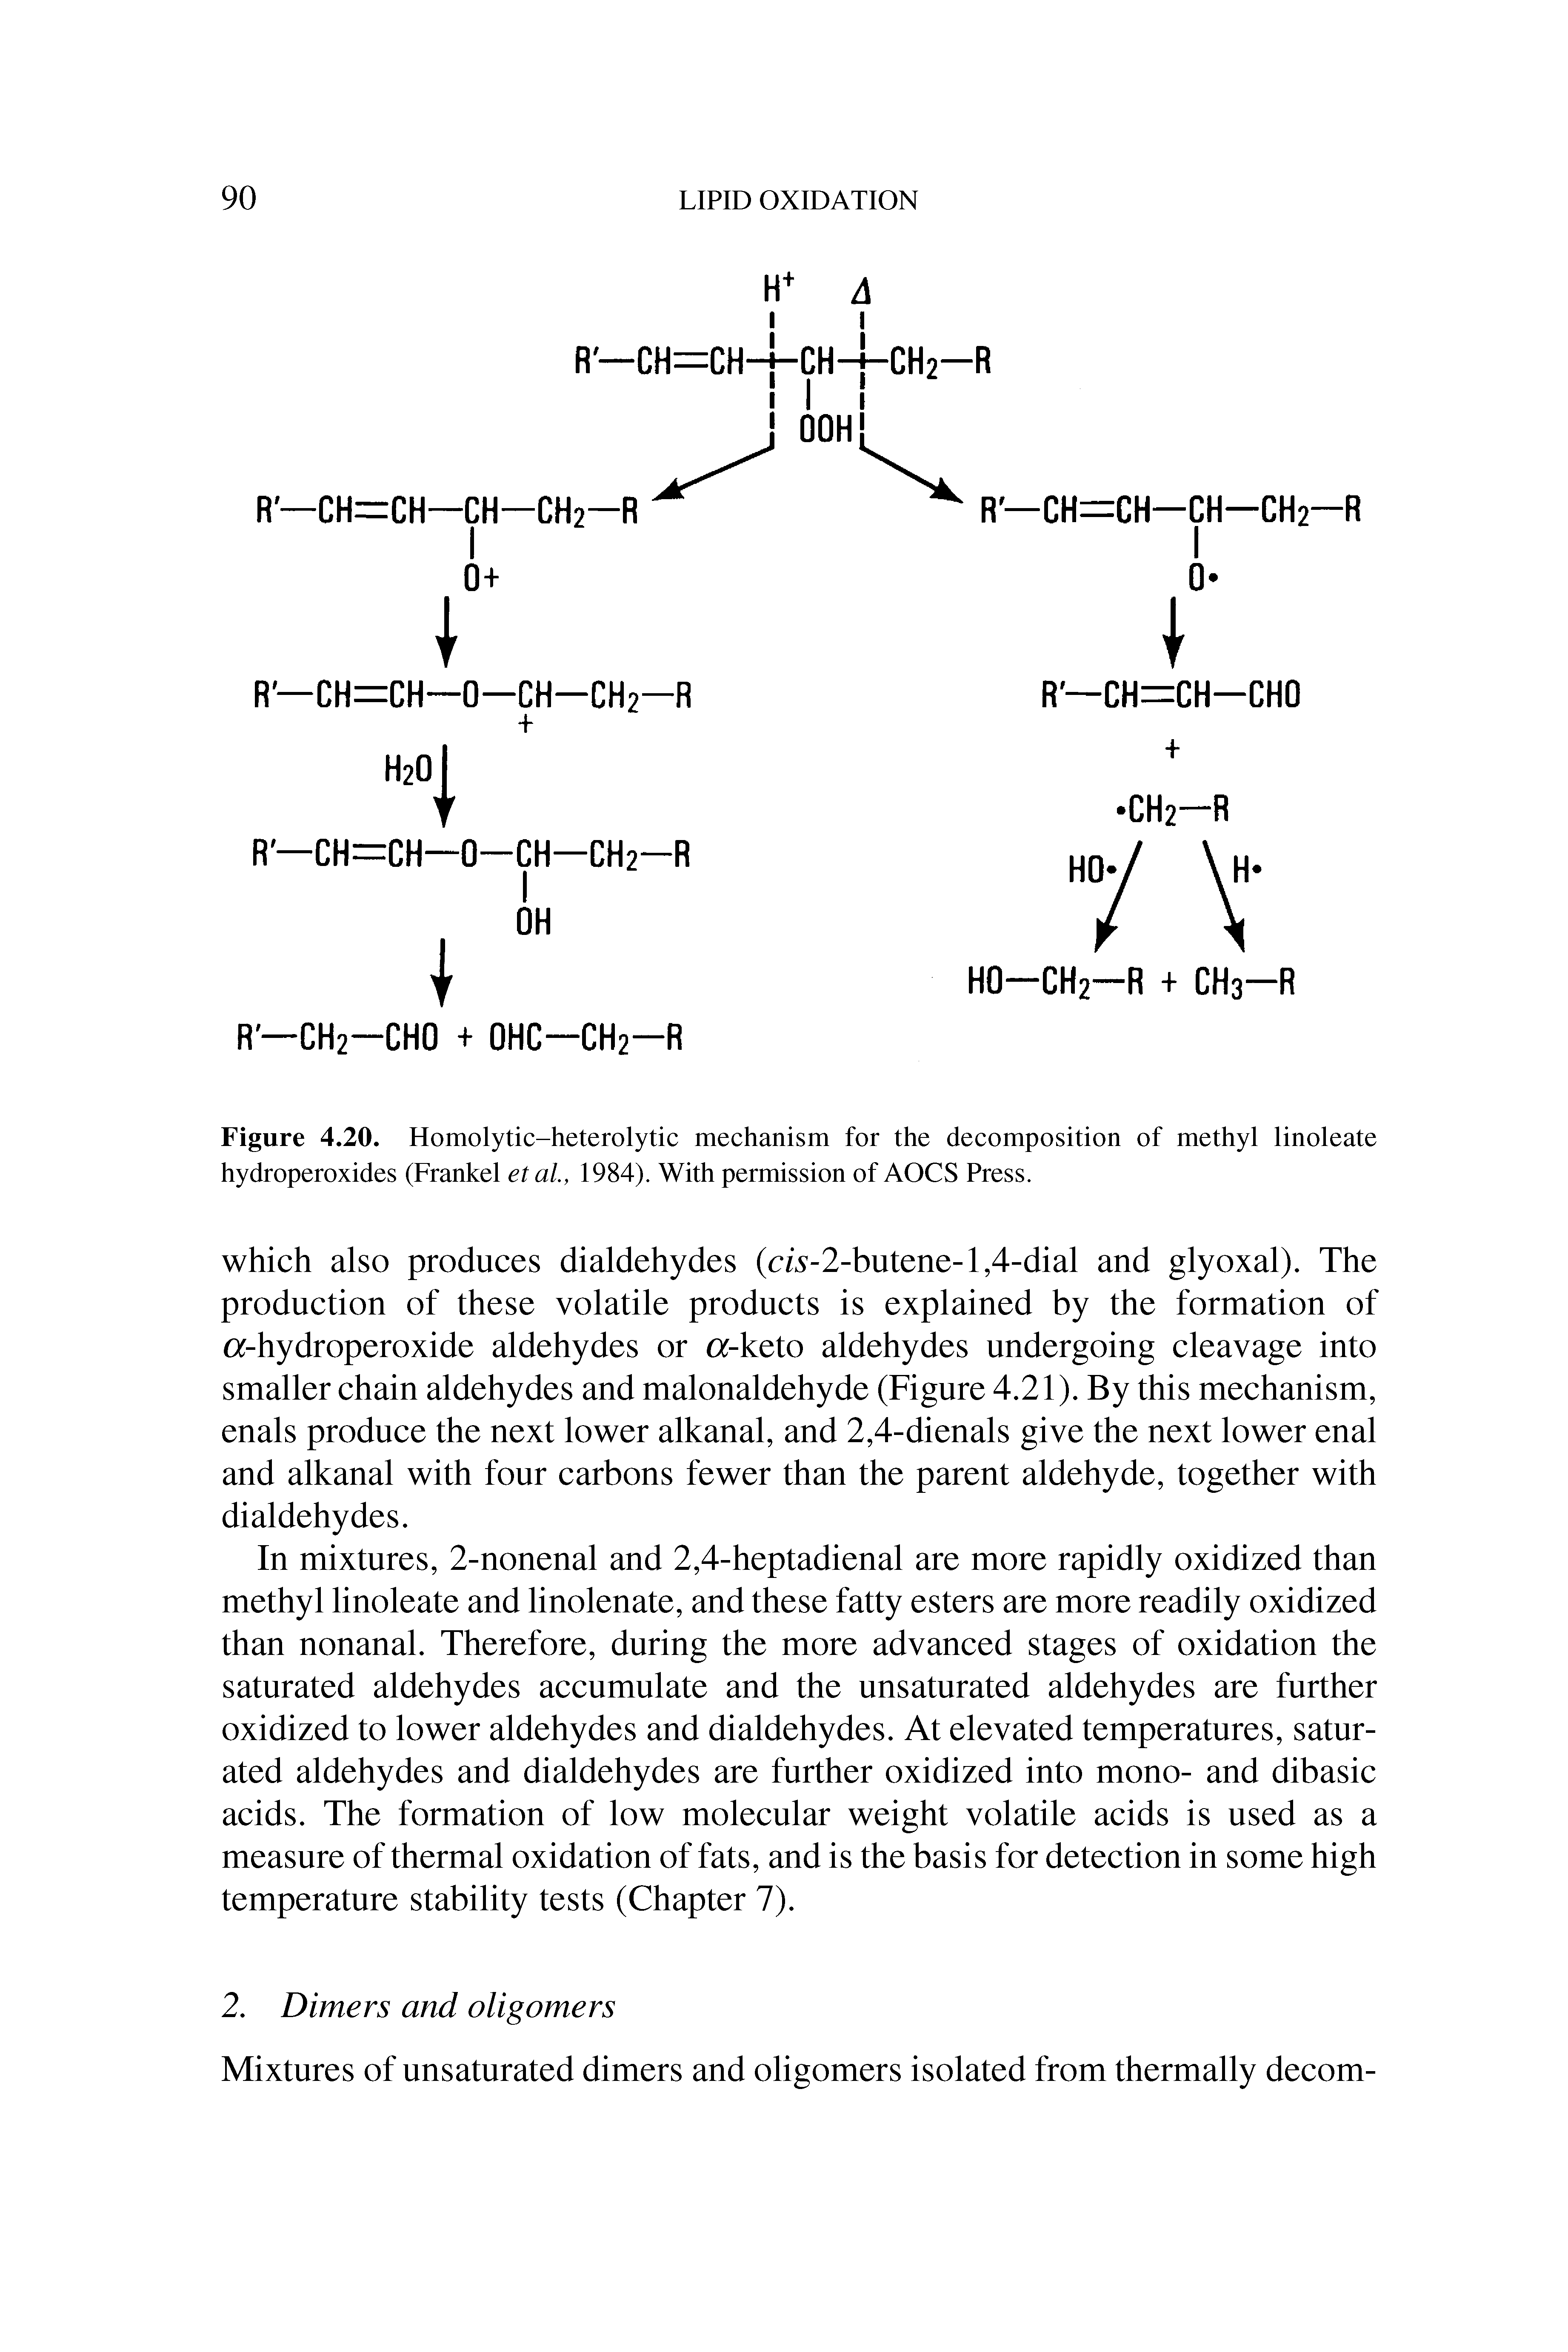 Figure 4.20. Homolytic-heterolytic mechanism for the decomposition of methyl linoleate hydroperoxides (Frankel et al, 1984). With permission of AOCS Press.